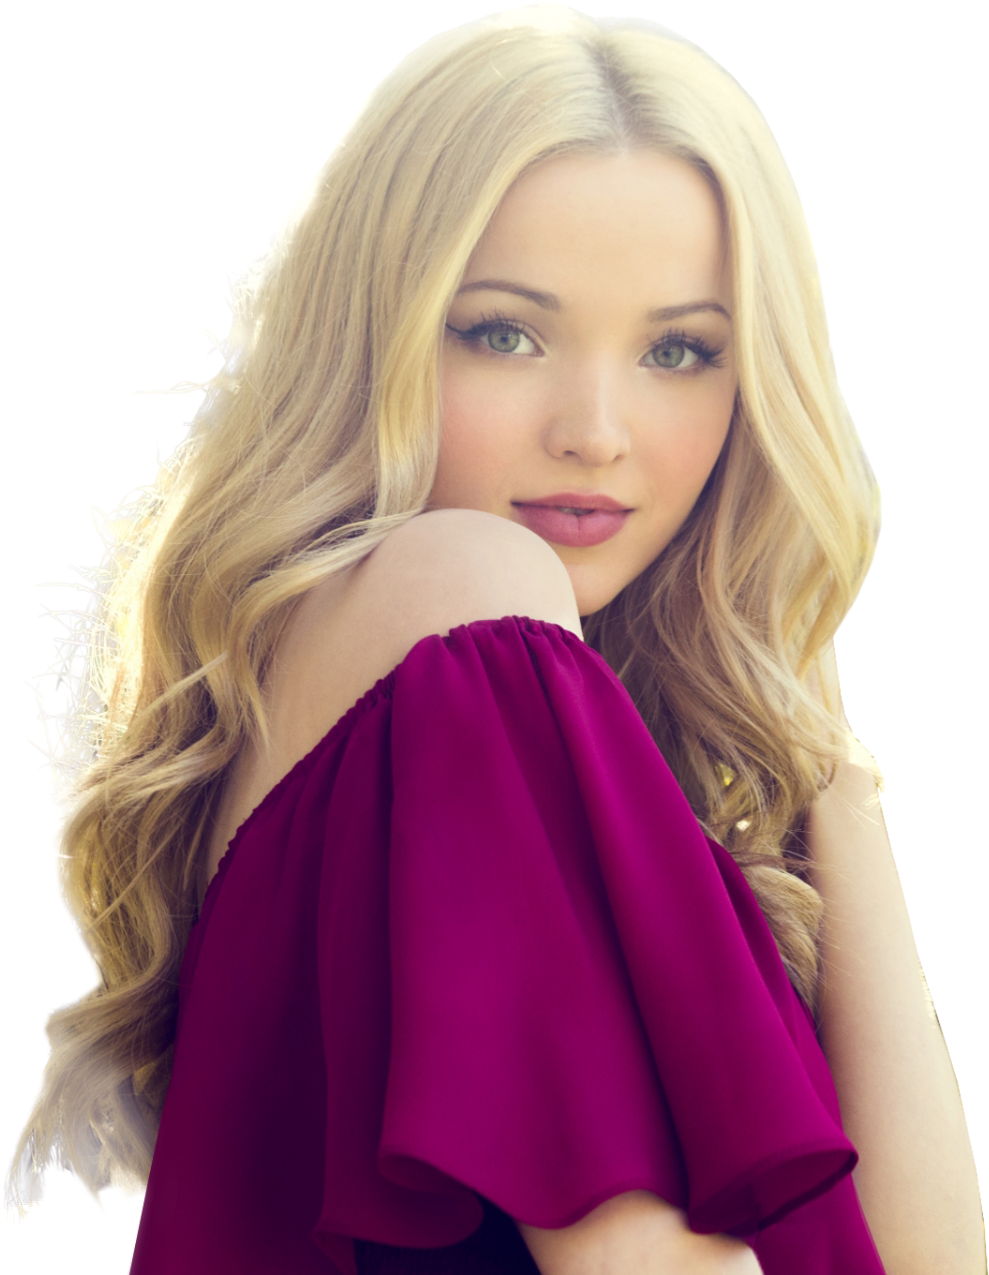 Blonde Womanin Red Dress PNG